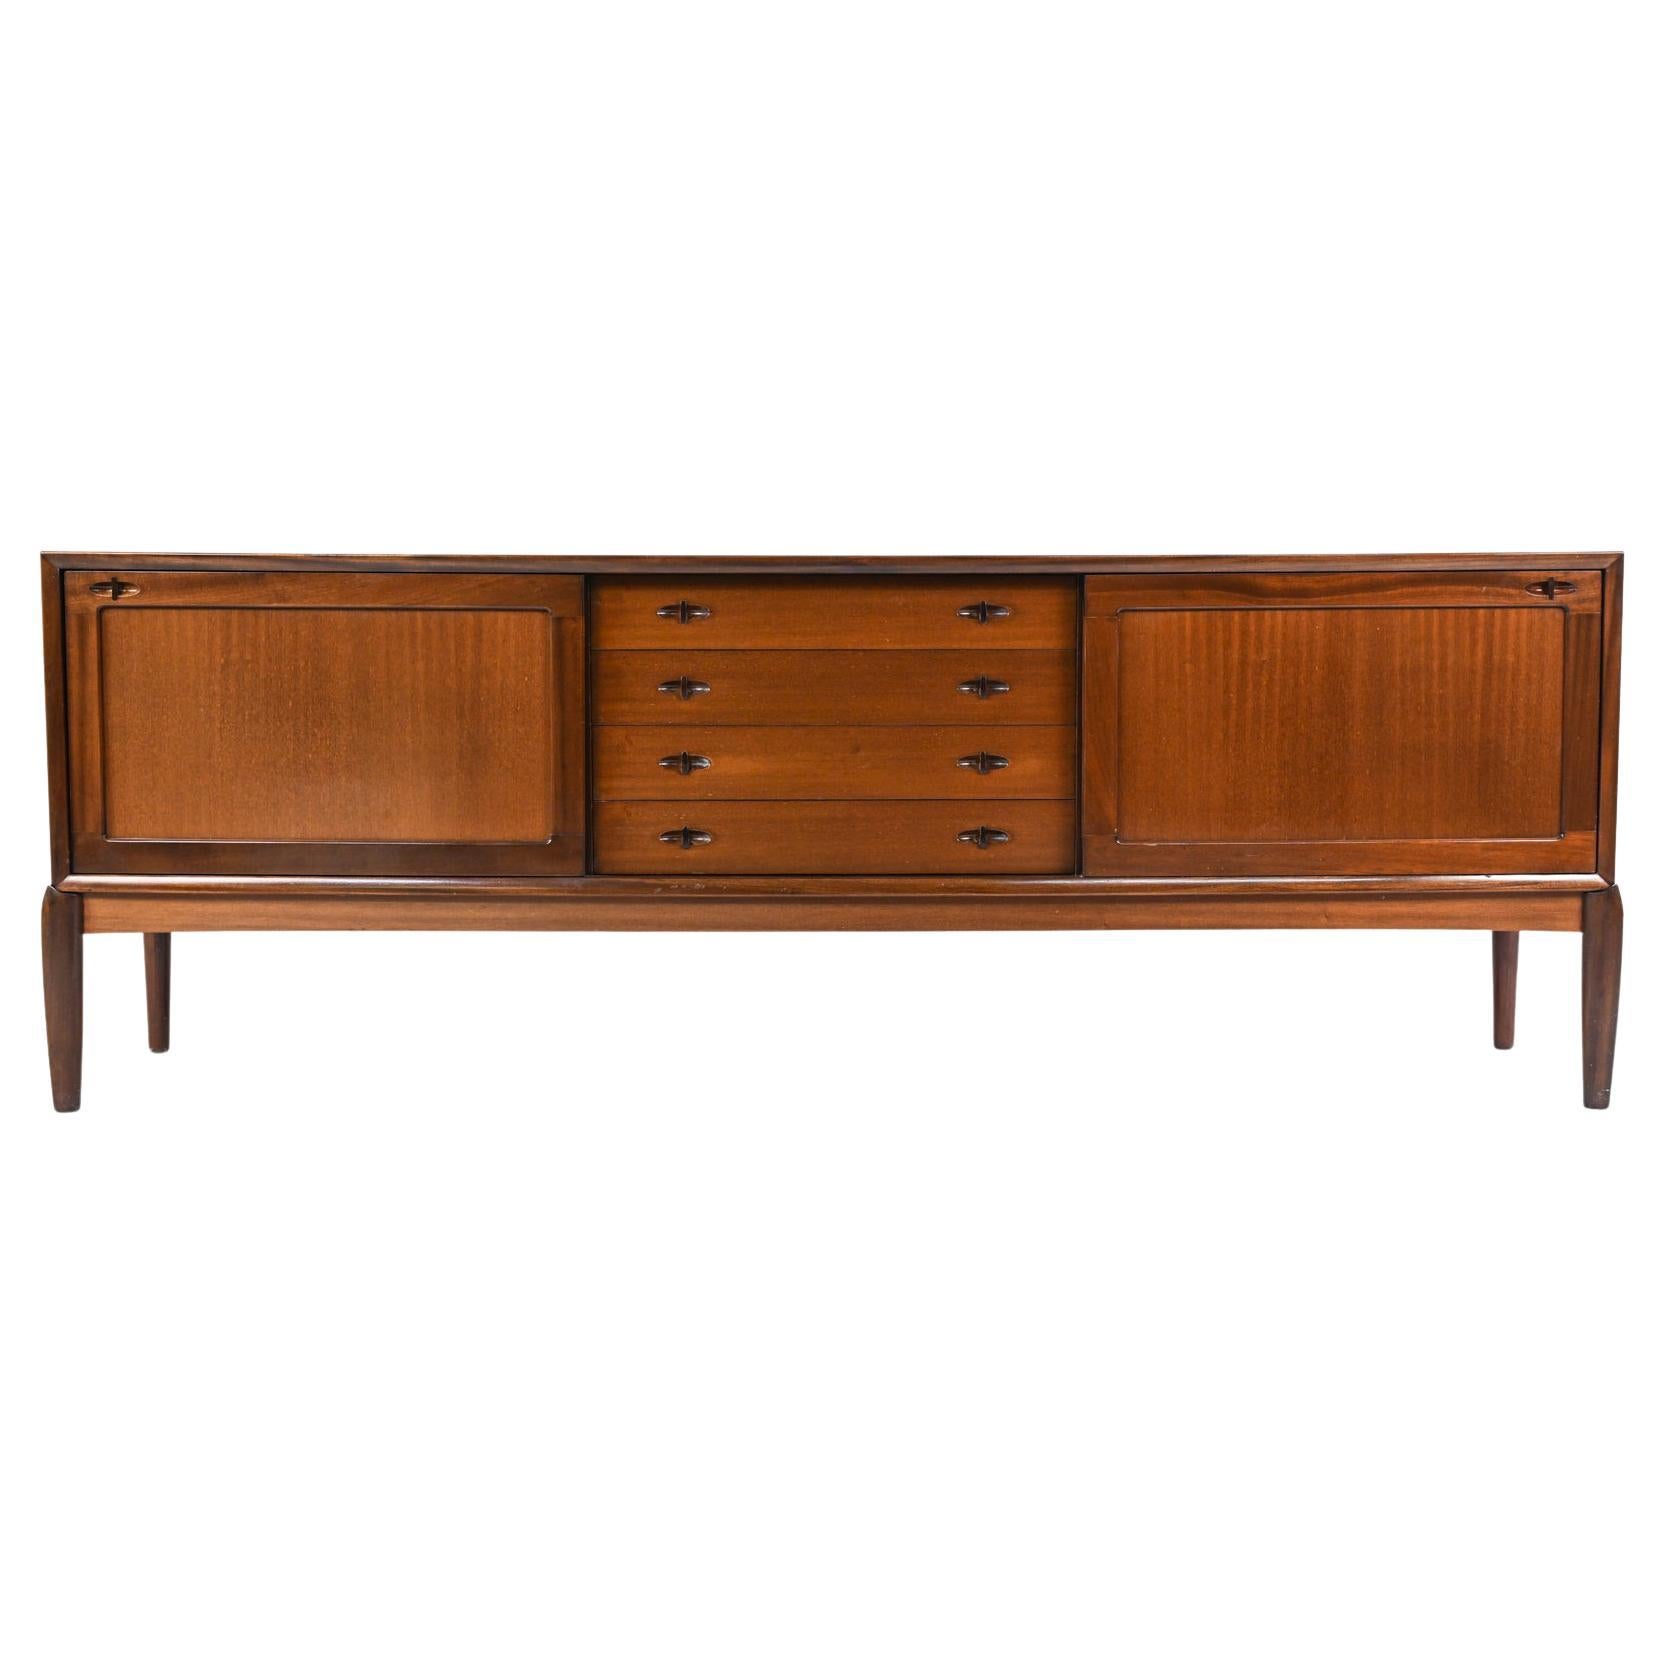 Danish Mahogany Sideboard by H.W. Klein for Bramin, 1950's